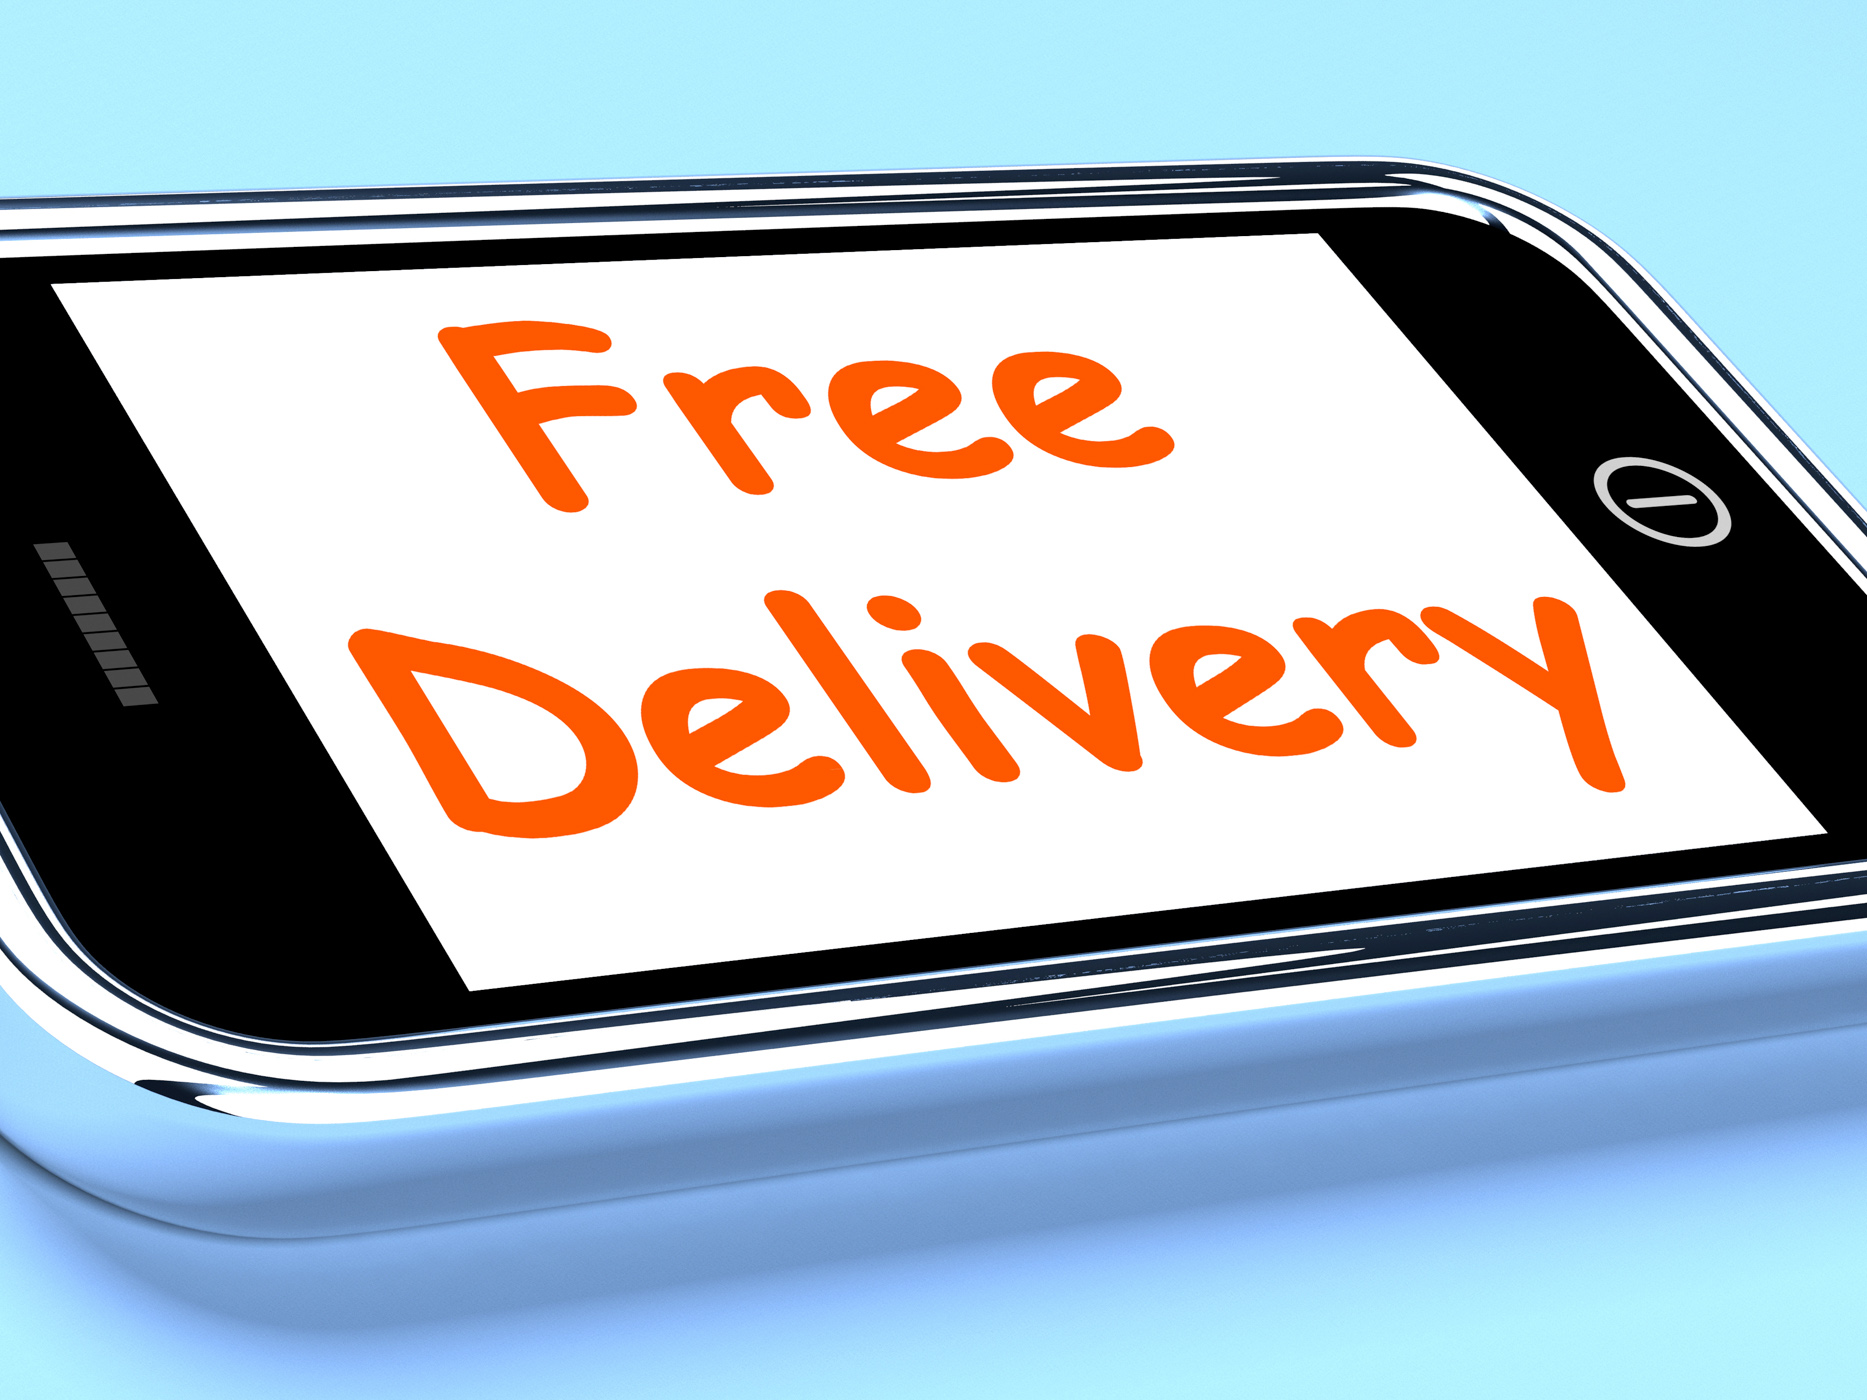 Free delivery on phone shows no charge or gratis deliver photo